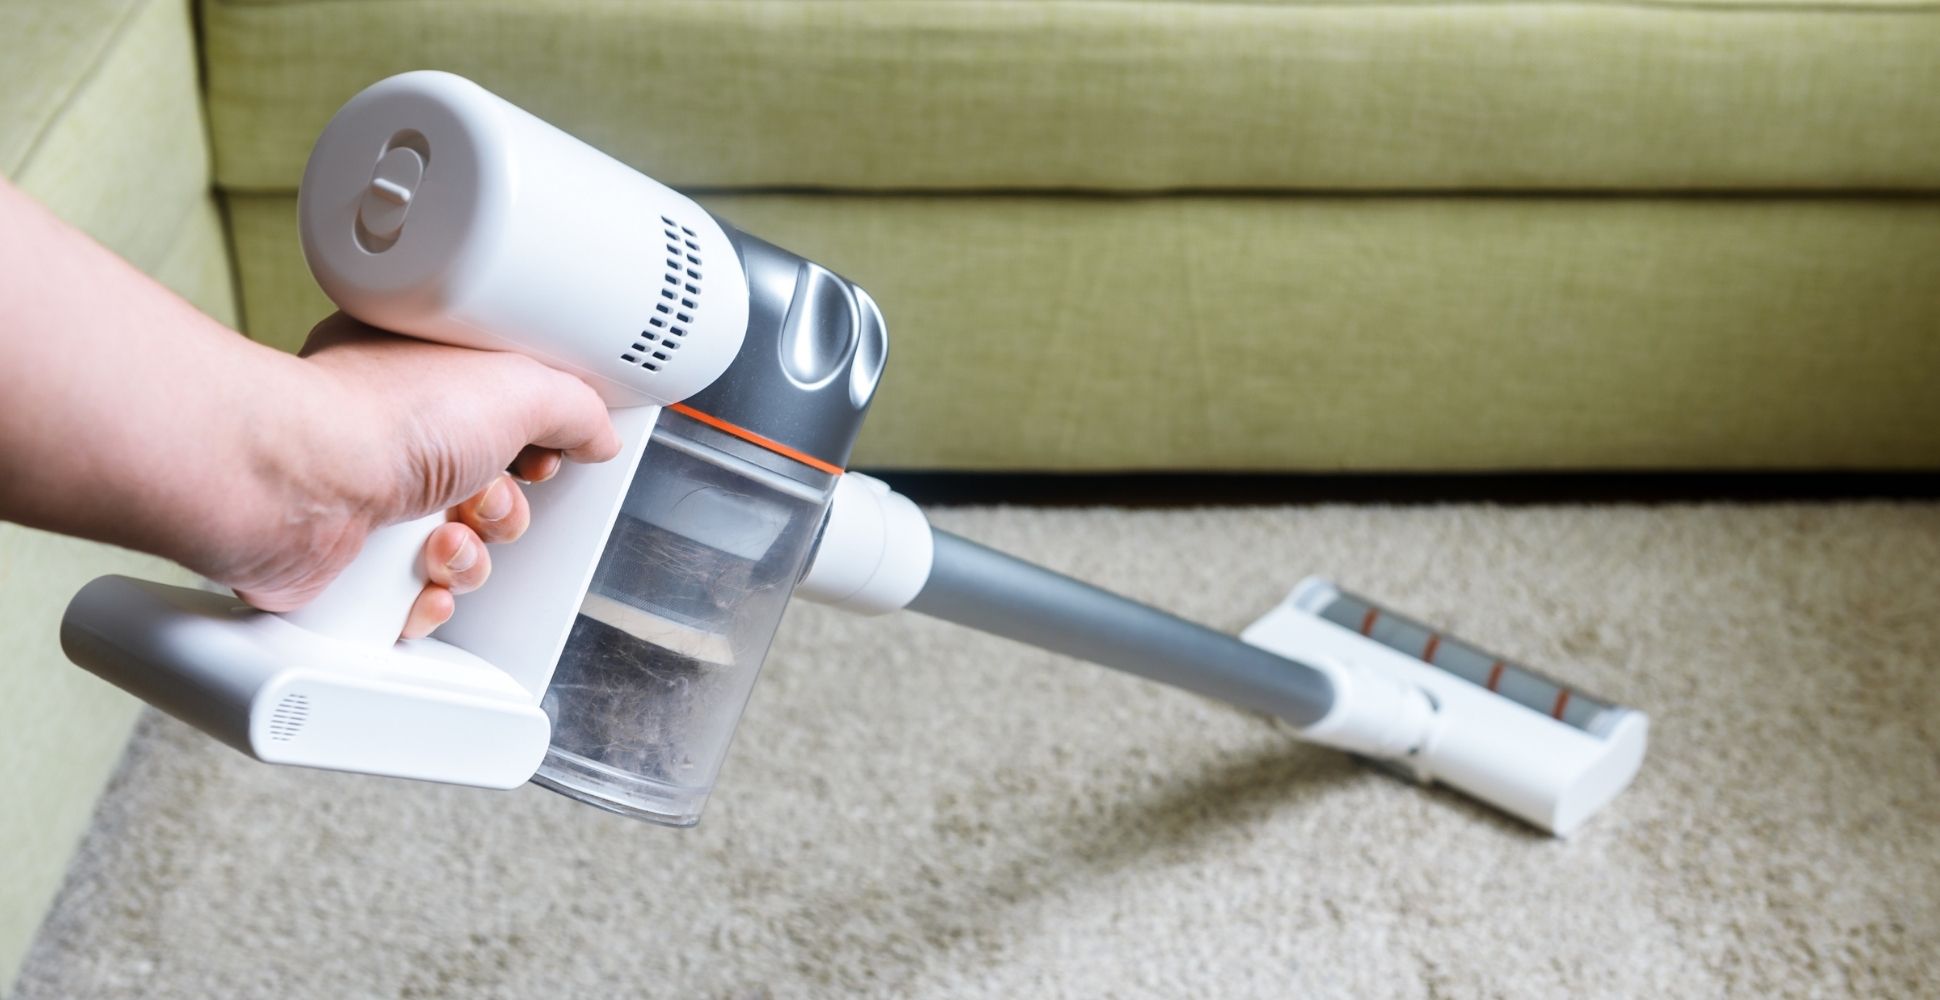 10 Best Stick Vacuums UK (2022 Review) Spruce Up!